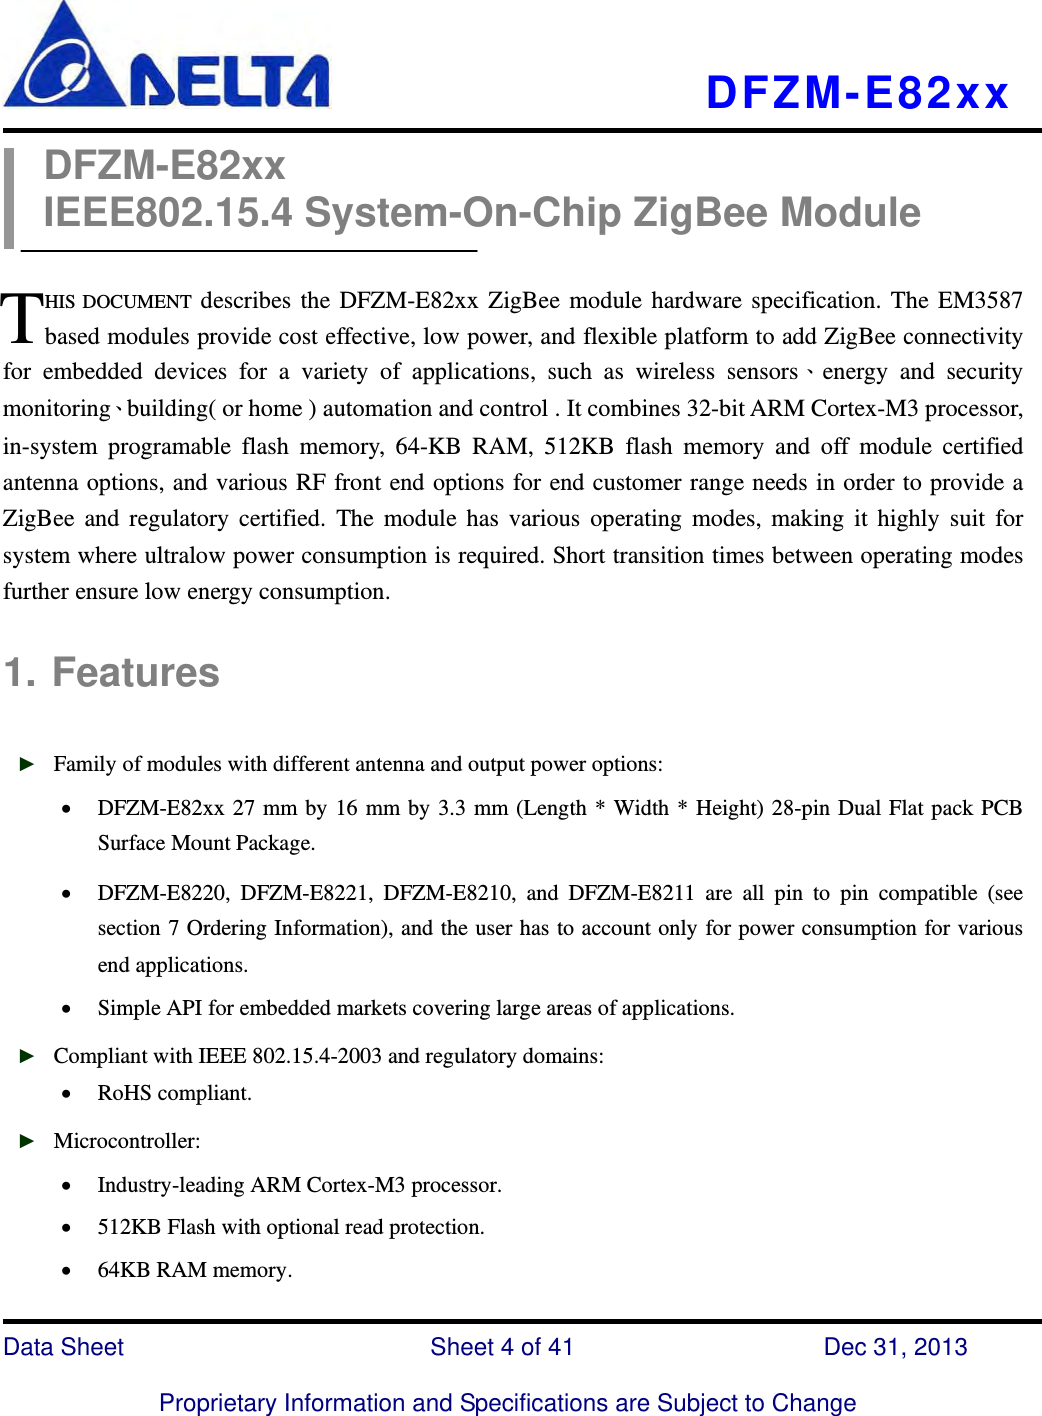   DFZM-E82xx   Data Sheet                 Sheet 4 of 41           Dec 31, 2013  Proprietary Information and Specifications are Subject to Change DFZM-E82xx IEEE802.15.4 System-On-Chip ZigBee Module  HIS DOCUMENT describes the DFZM-E82xx ZigBee module hardware specification. The EM3587 based modules provide cost effective, low power, and flexible platform to add ZigBee connectivity for embedded devices for a variety of applications, such as wireless sensors、energy and security monitoring、building( or home ) automation and control . It combines 32-bit ARM Cortex-M3 processor, in-system programable flash memory, 64-KB RAM, 512KB flash memory and off module certified antenna options, and various RF front end options for end customer range needs in order to provide a ZigBee and regulatory certified. The module has various operating modes, making it highly suit for system where ultralow power consumption is required. Short transition times between operating modes further ensure low energy consumption.  1. Features  ► Family of modules with different antenna and output power options:  DFZM-E82xx 27 mm by 16 mm by 3.3 mm (Length * Width * Height) 28-pin Dual Flat pack PCB Surface Mount Package.  DFZM-E8220, DFZM-E8221, DFZM-E8210, and DFZM-E8211 are all pin to pin compatible (see section 7 Ordering Information), and the user has to account only for power consumption for various end applications.  Simple API for embedded markets covering large areas of applications. ► Compliant with IEEE 802.15.4-2003 and regulatory domains:  RoHS compliant.   ► Microcontroller:  Industry-leading ARM Cortex-M3 processor.  512KB Flash with optional read protection.    64KB RAM memory. T